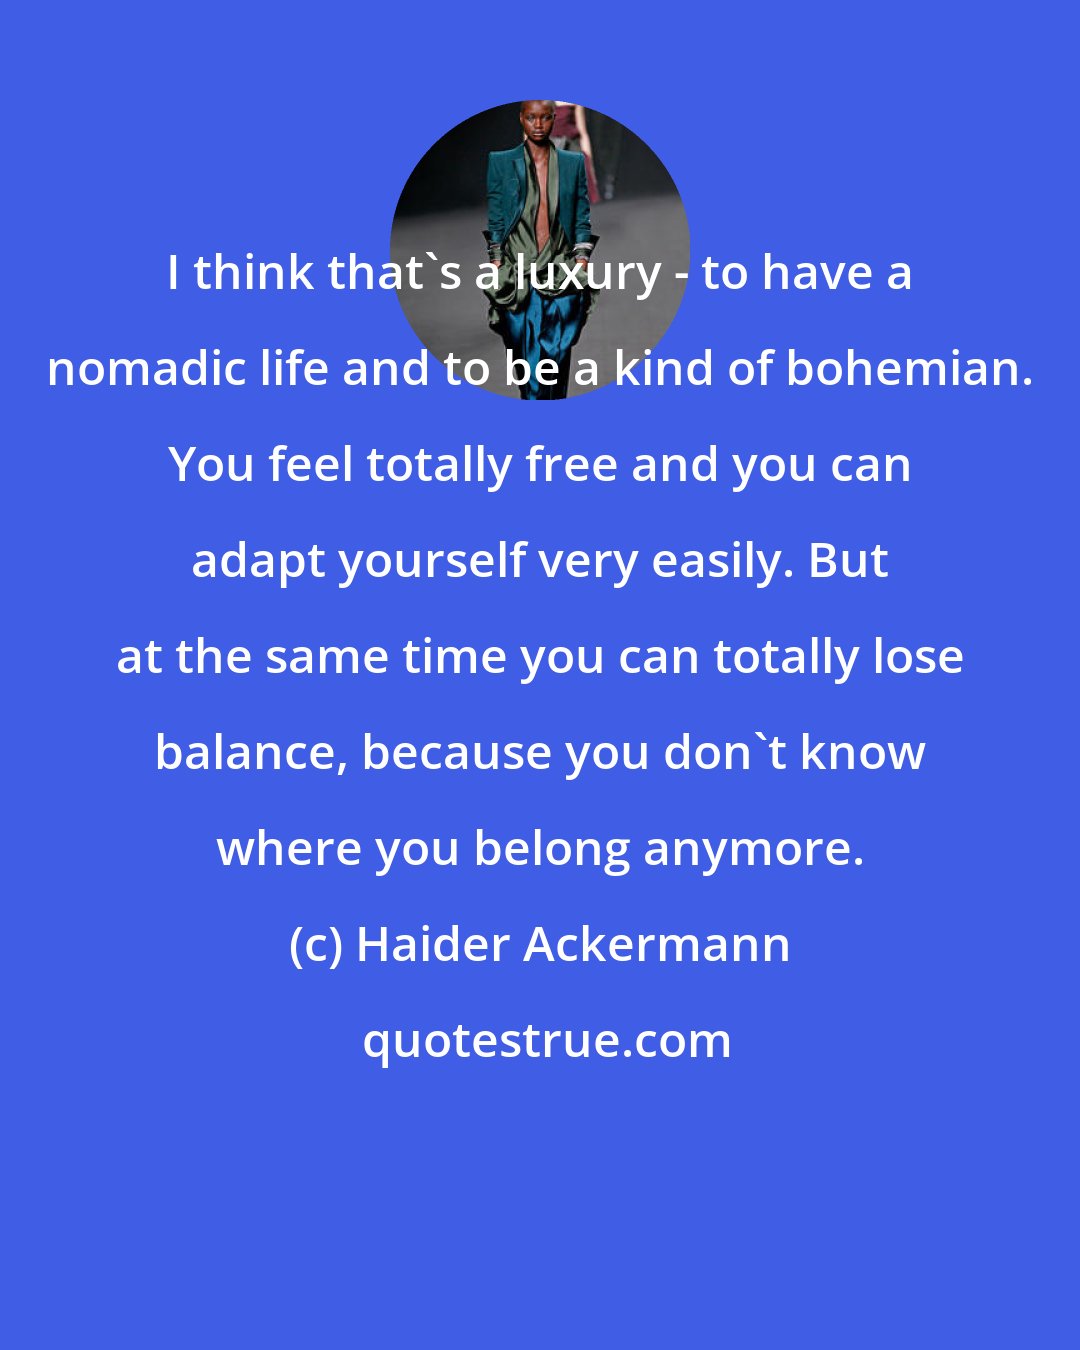 Haider Ackermann: I think that's a luxury - to have a nomadic life and to be a kind of bohemian. You feel totally free and you can adapt yourself very easily. But at the same time you can totally lose balance, because you don't know where you belong anymore.